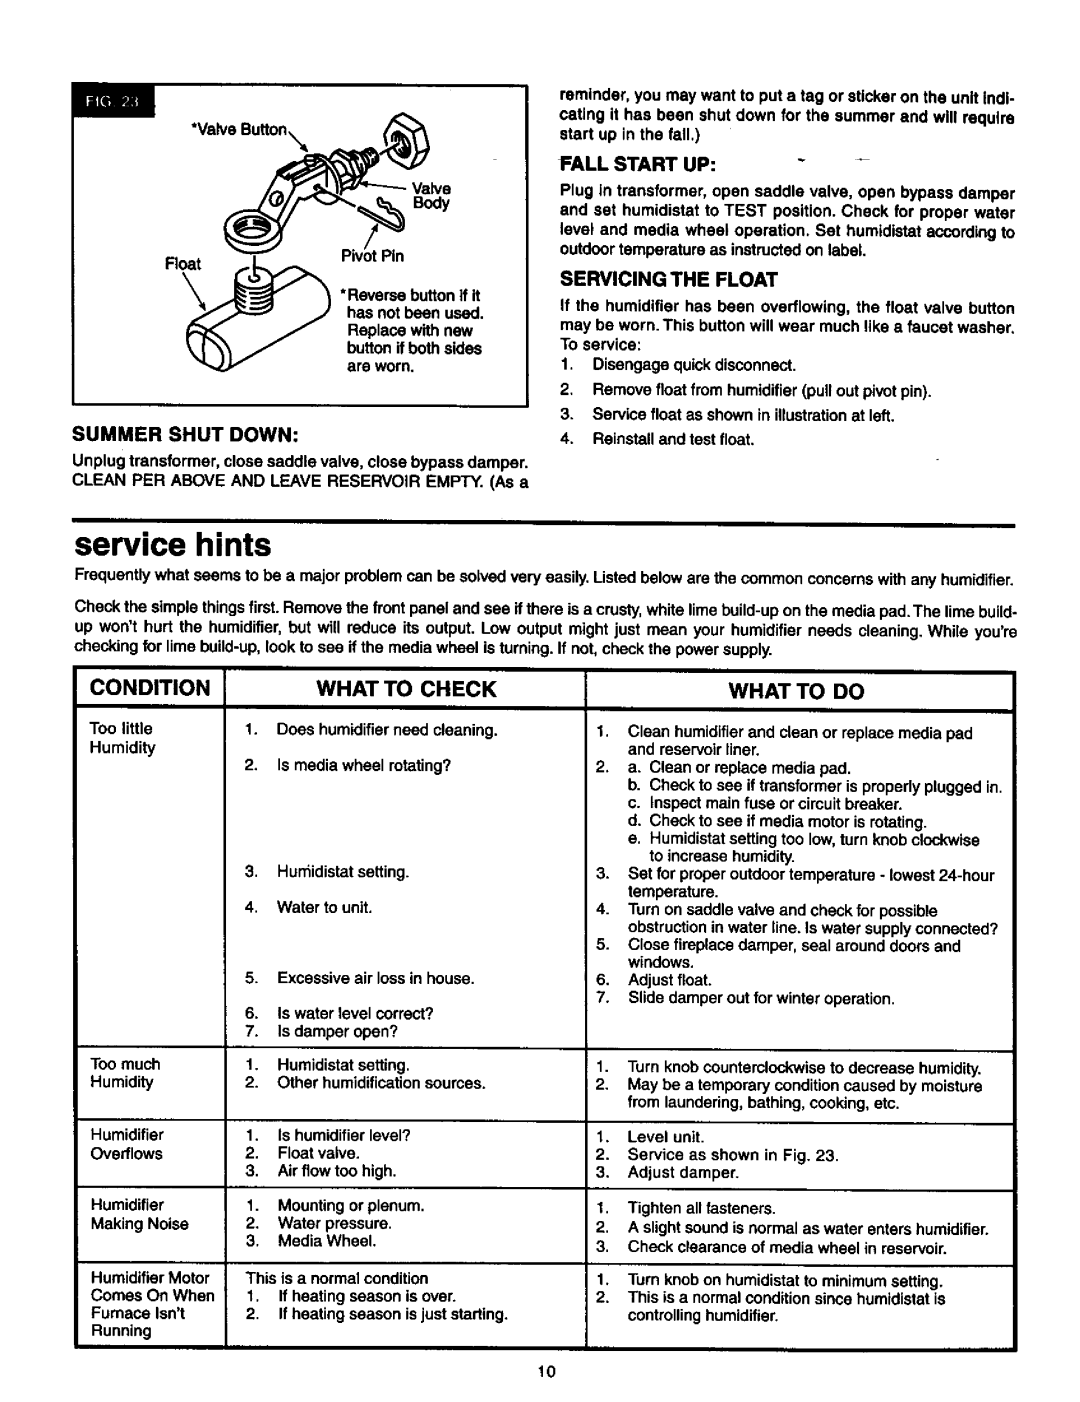 Sears 2500 manual Service hints, Body, Summer Shut Down, Fall Start UP, HumidifierMotor Comes On When Furnace Isnt Running 